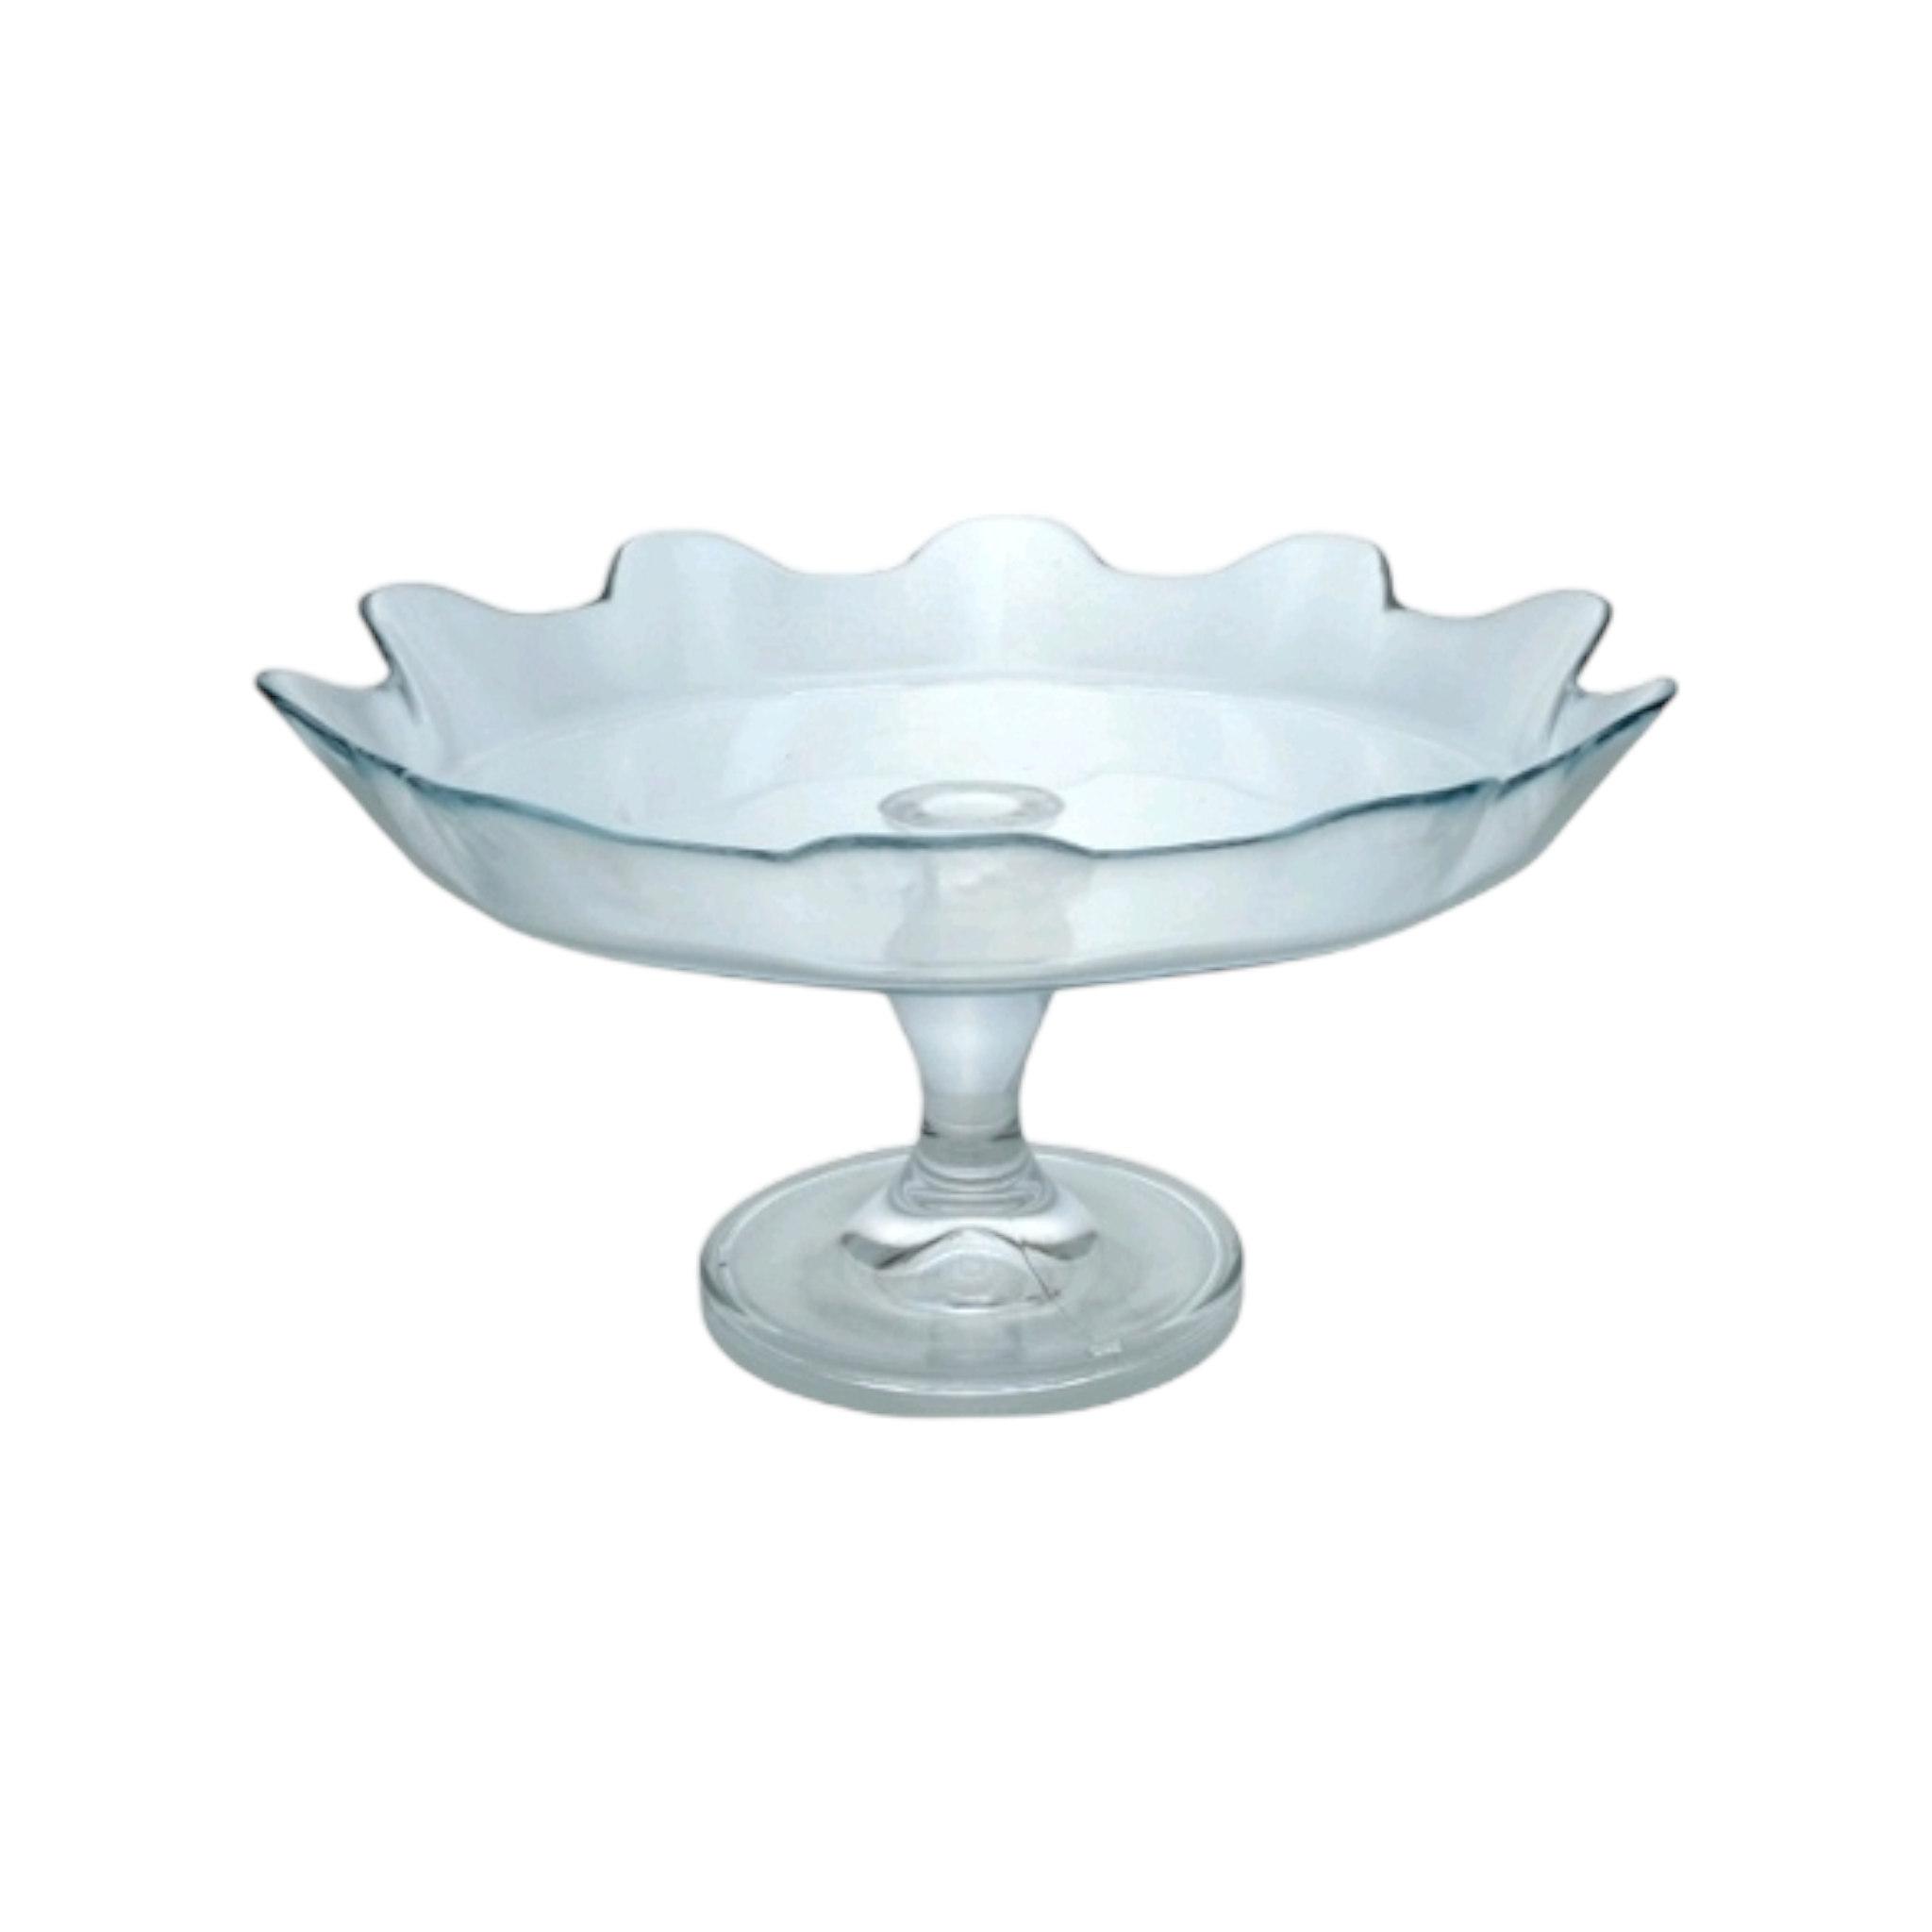 Pasabahce Patisserie Server Platter Footed 320mm 23091